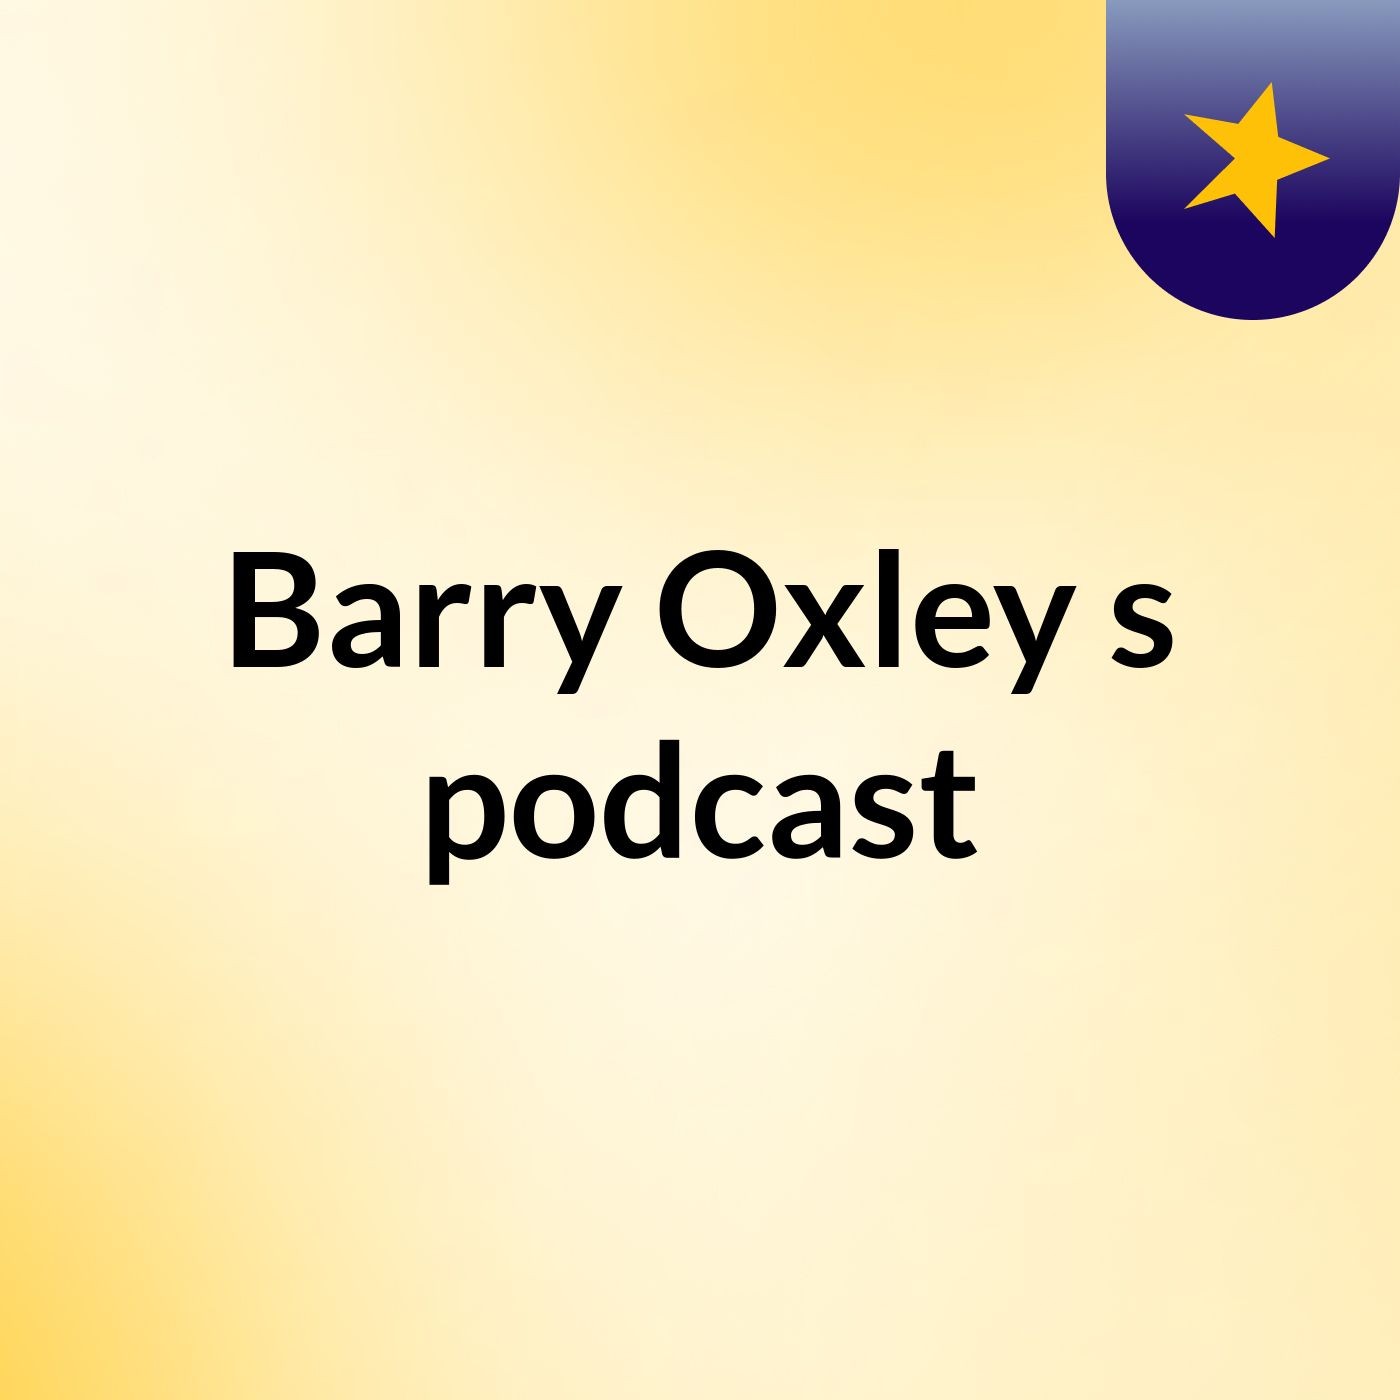 Episode 6 - Barry Oxley's podcast